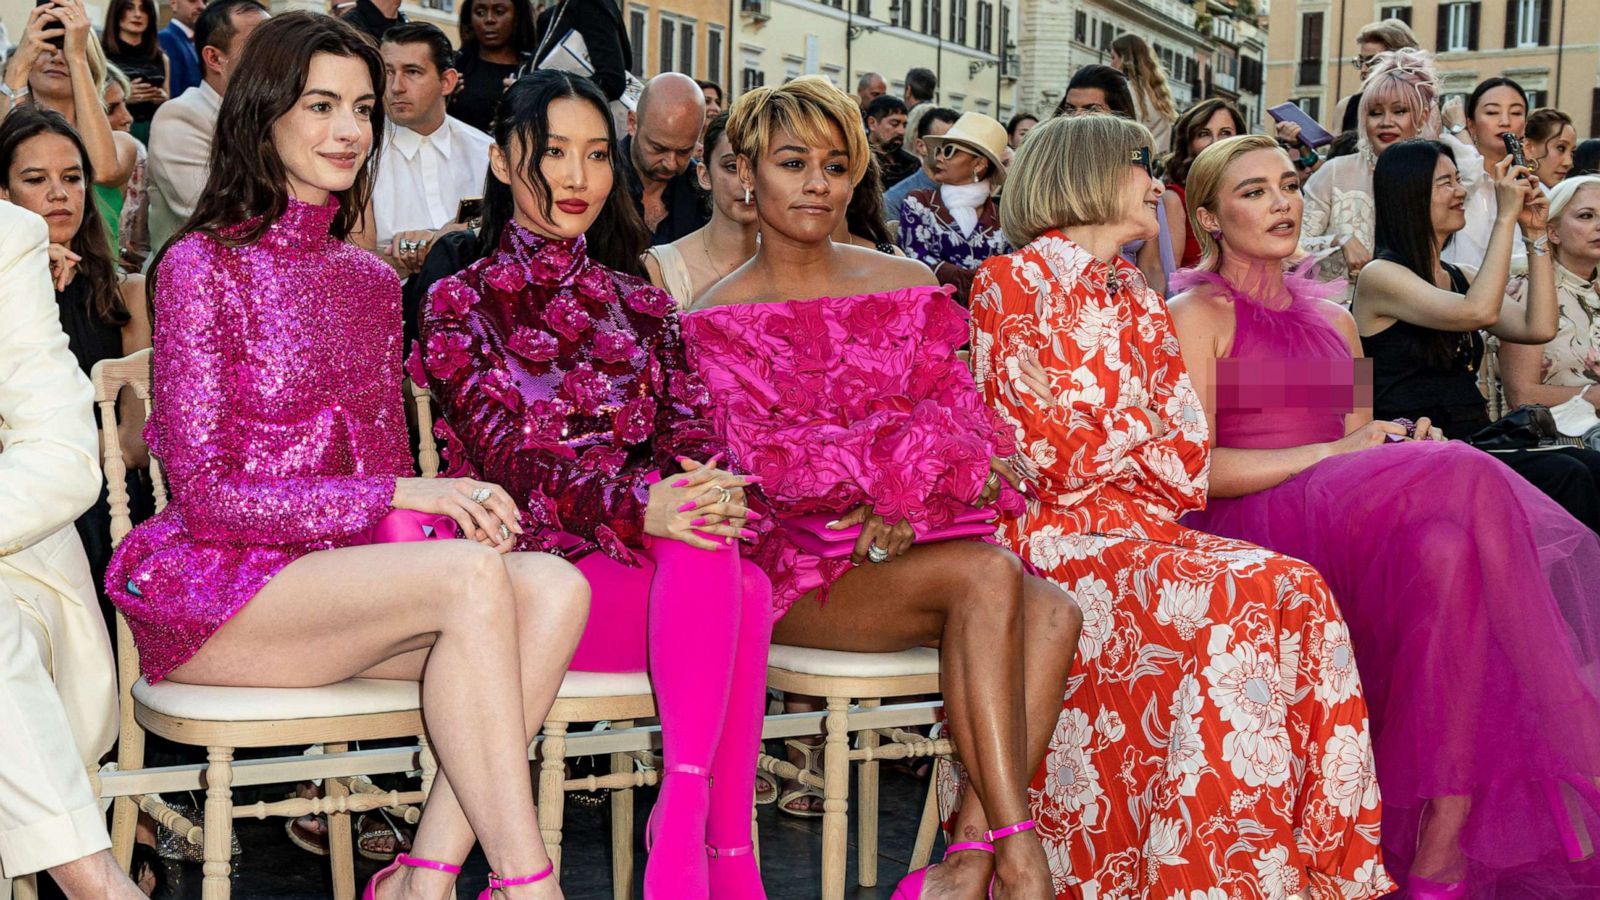 Barbiecore trend: All pink clothing is summer's hottest look